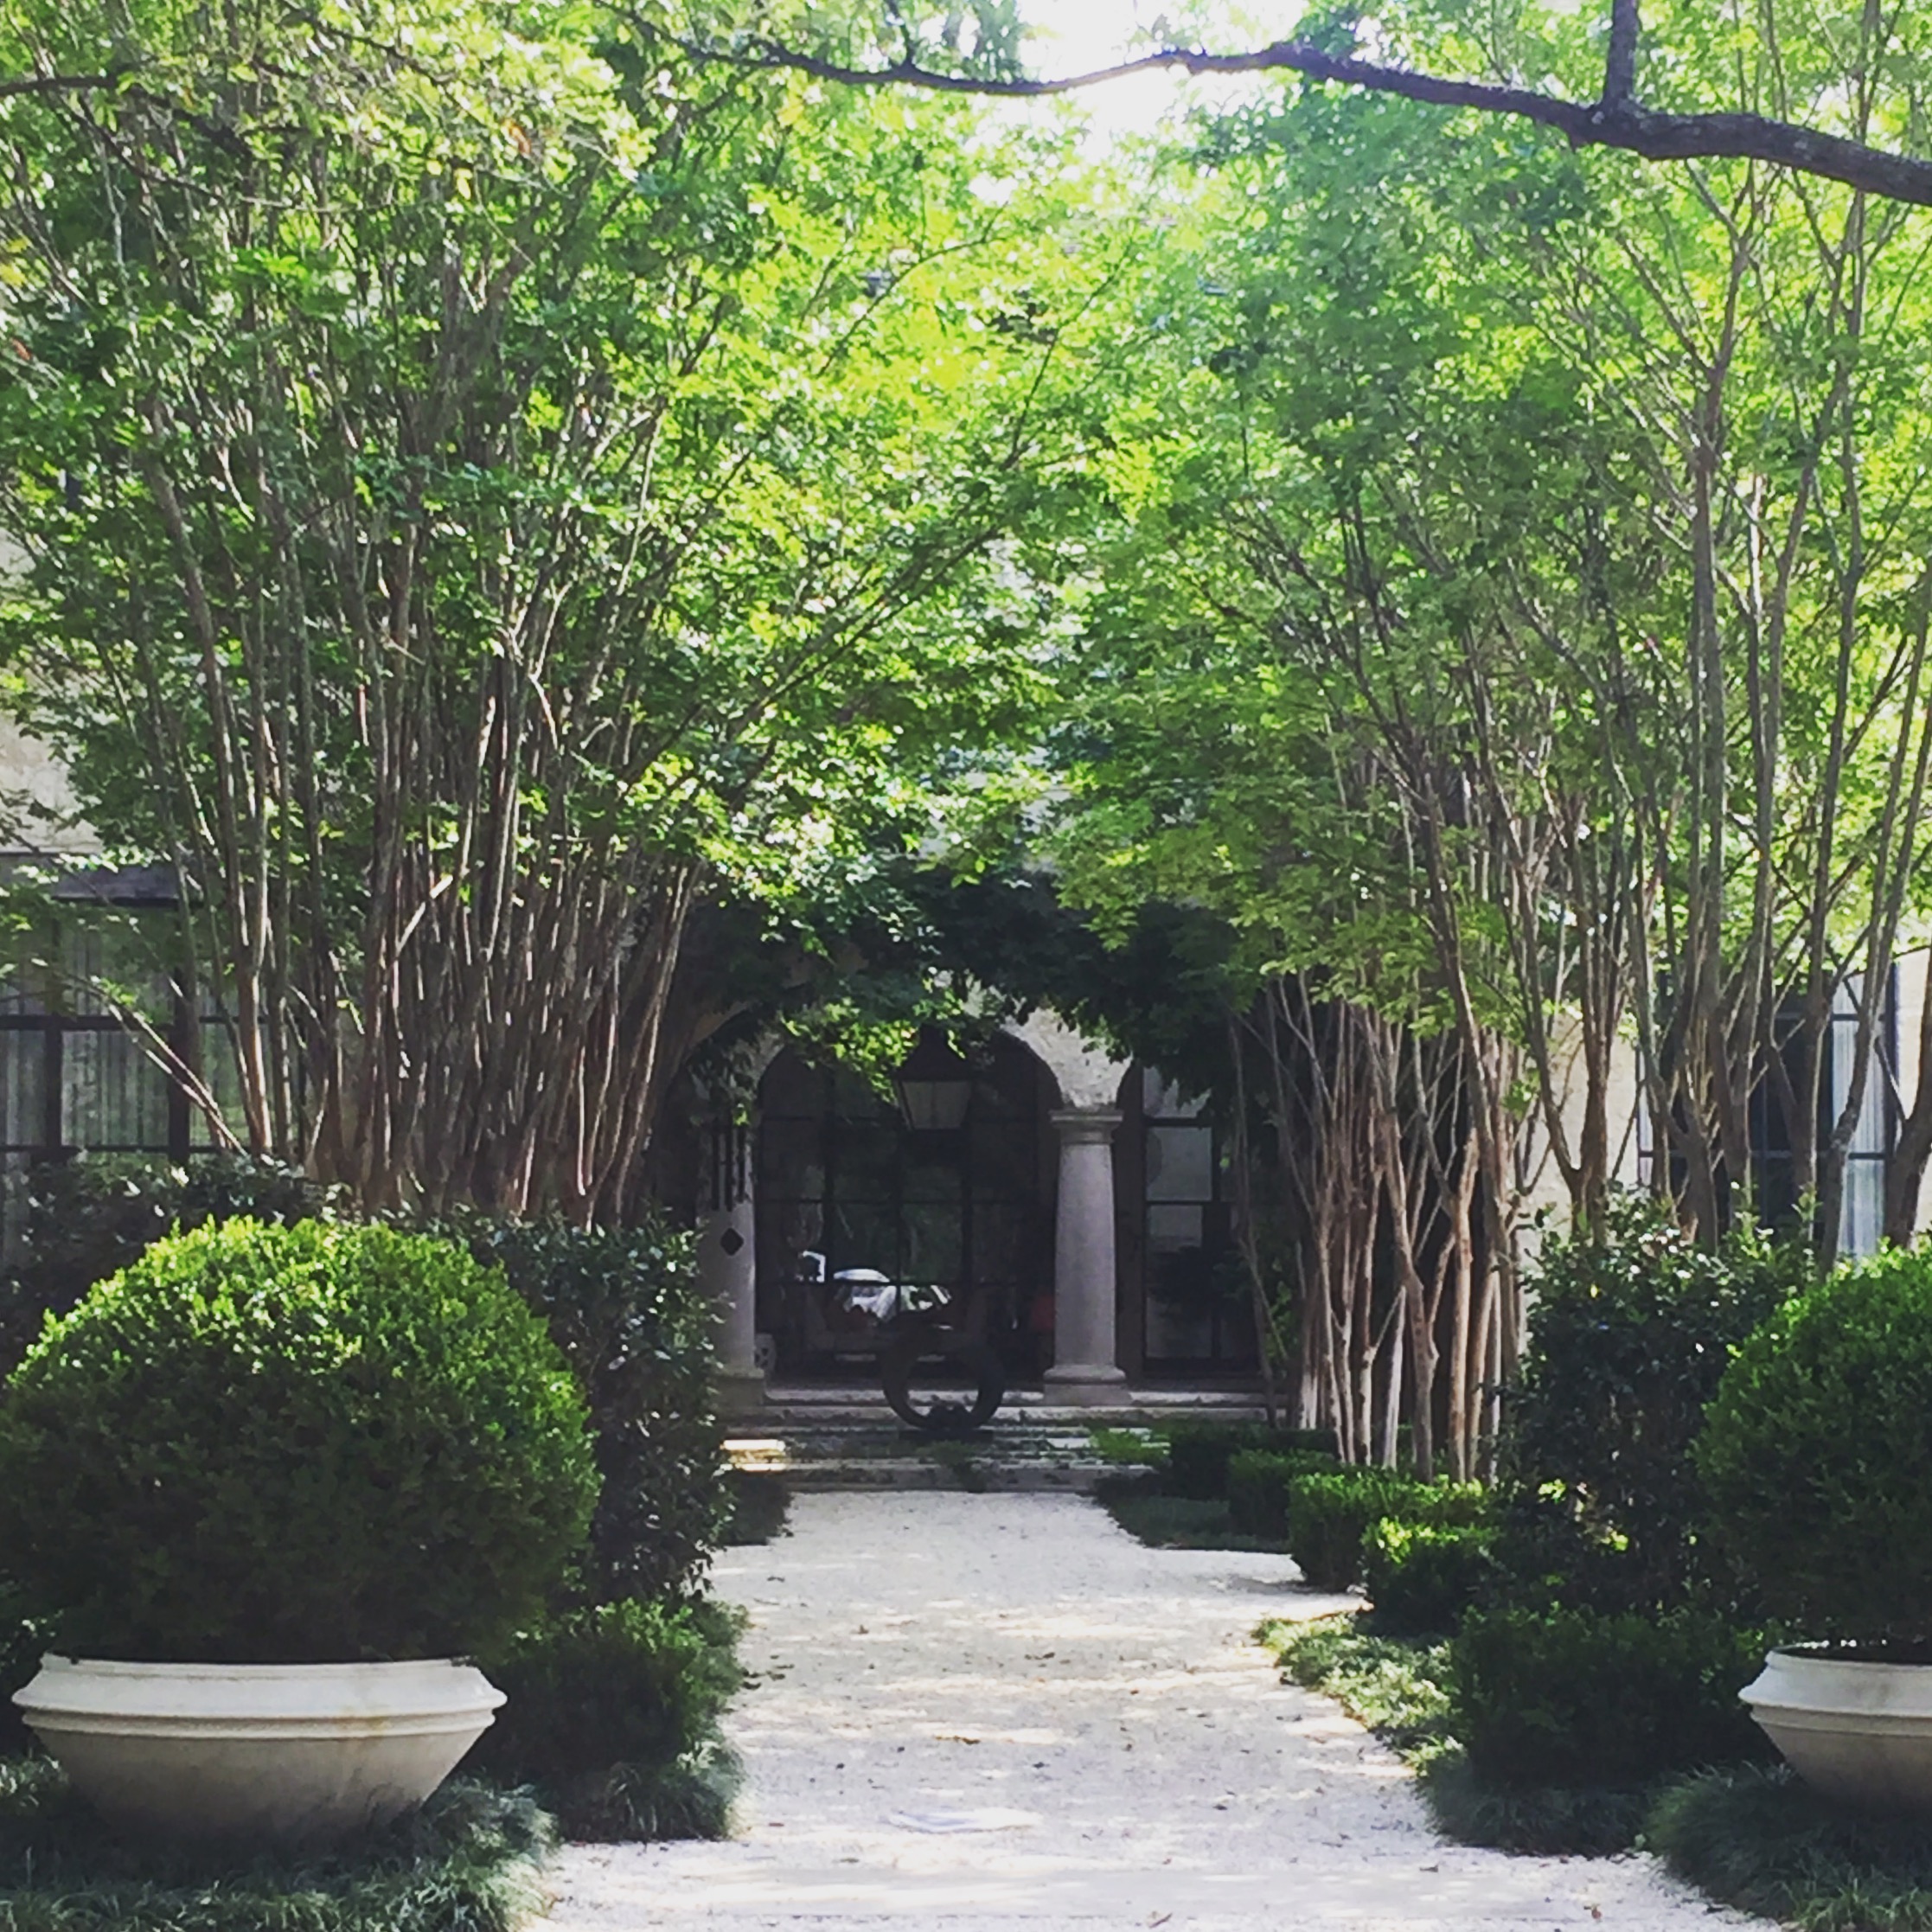 Homes in Dallas photo by The Potted Boxwood 5